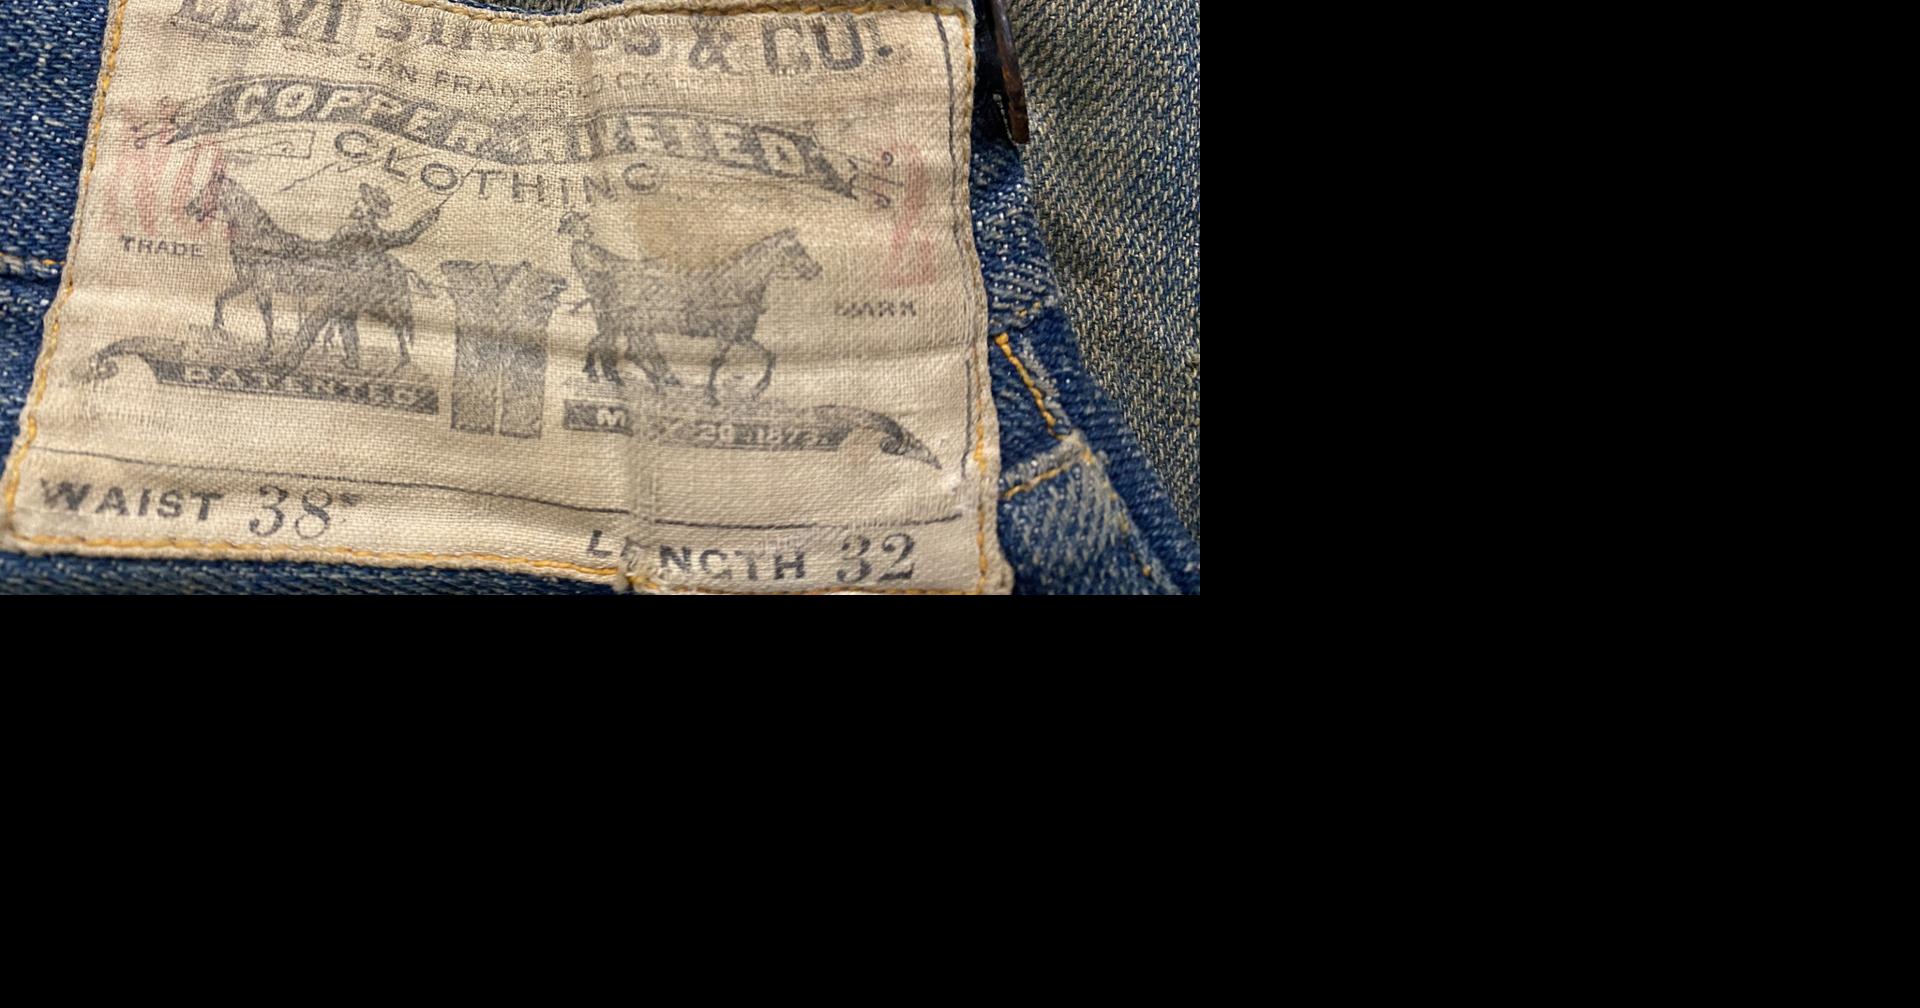 19th-century Levi's jeans found in mine shaft sell for more than $87,000 |  News 